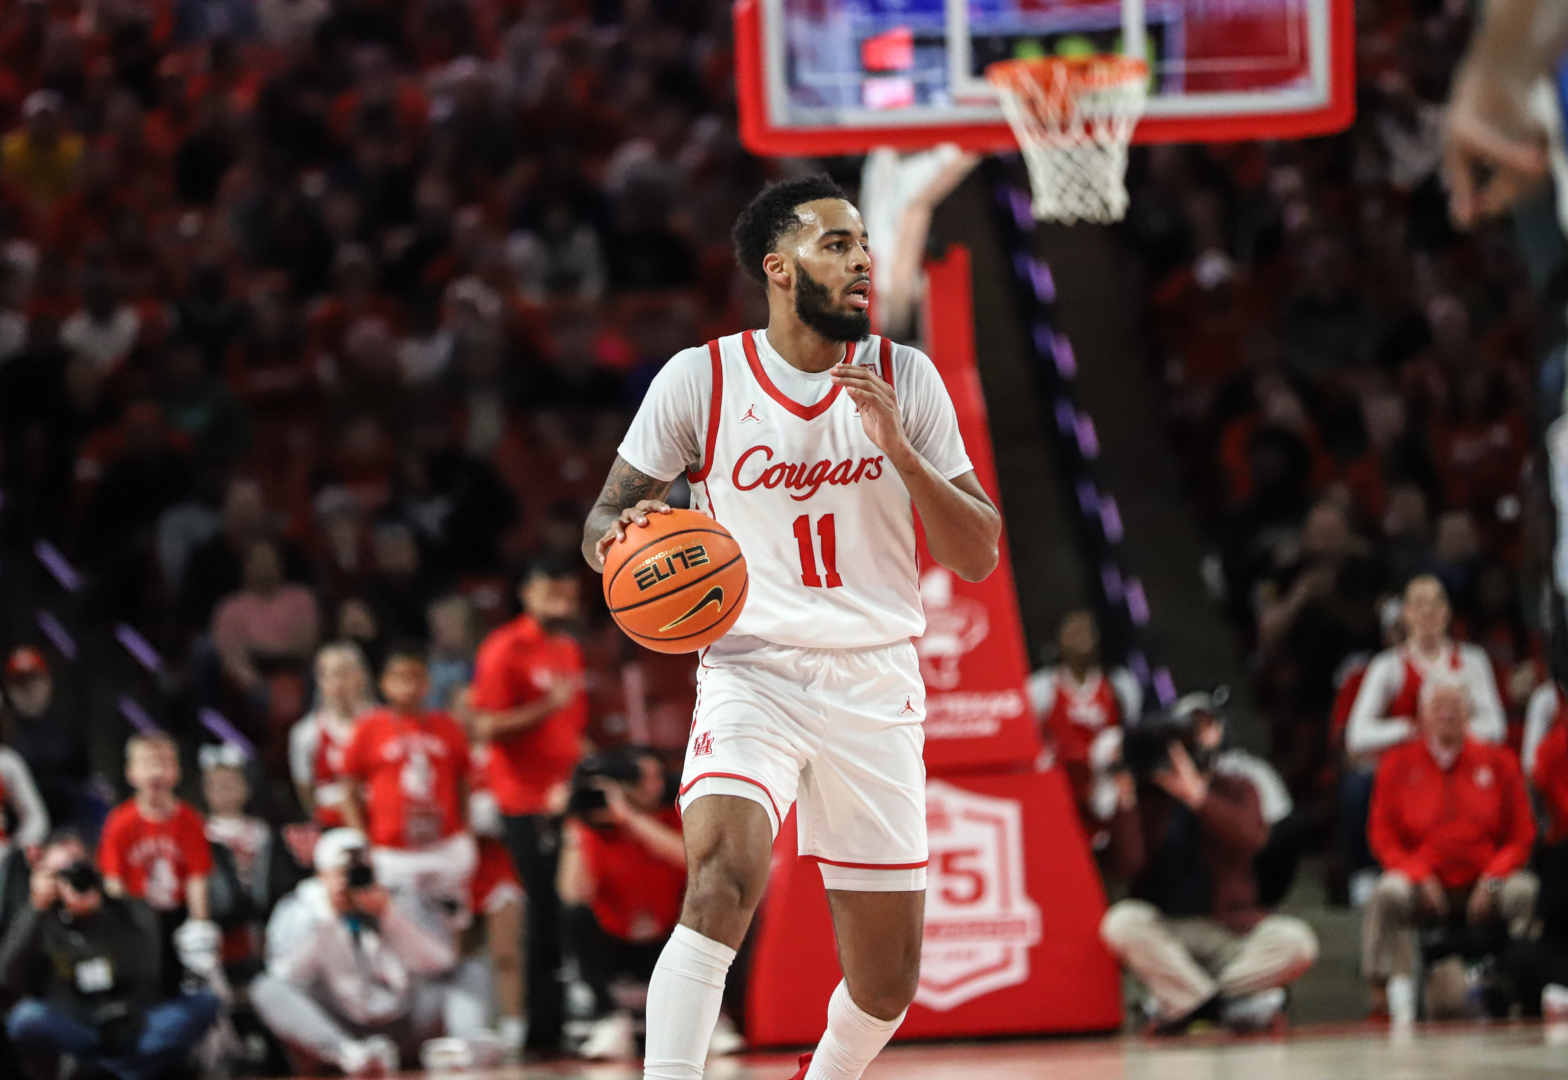 Kelvin Sampson has described Kyler Edwards as "solid" all year, because of his unique ability to excel in every aspect of the game. | Sean Thomas/The Cougar